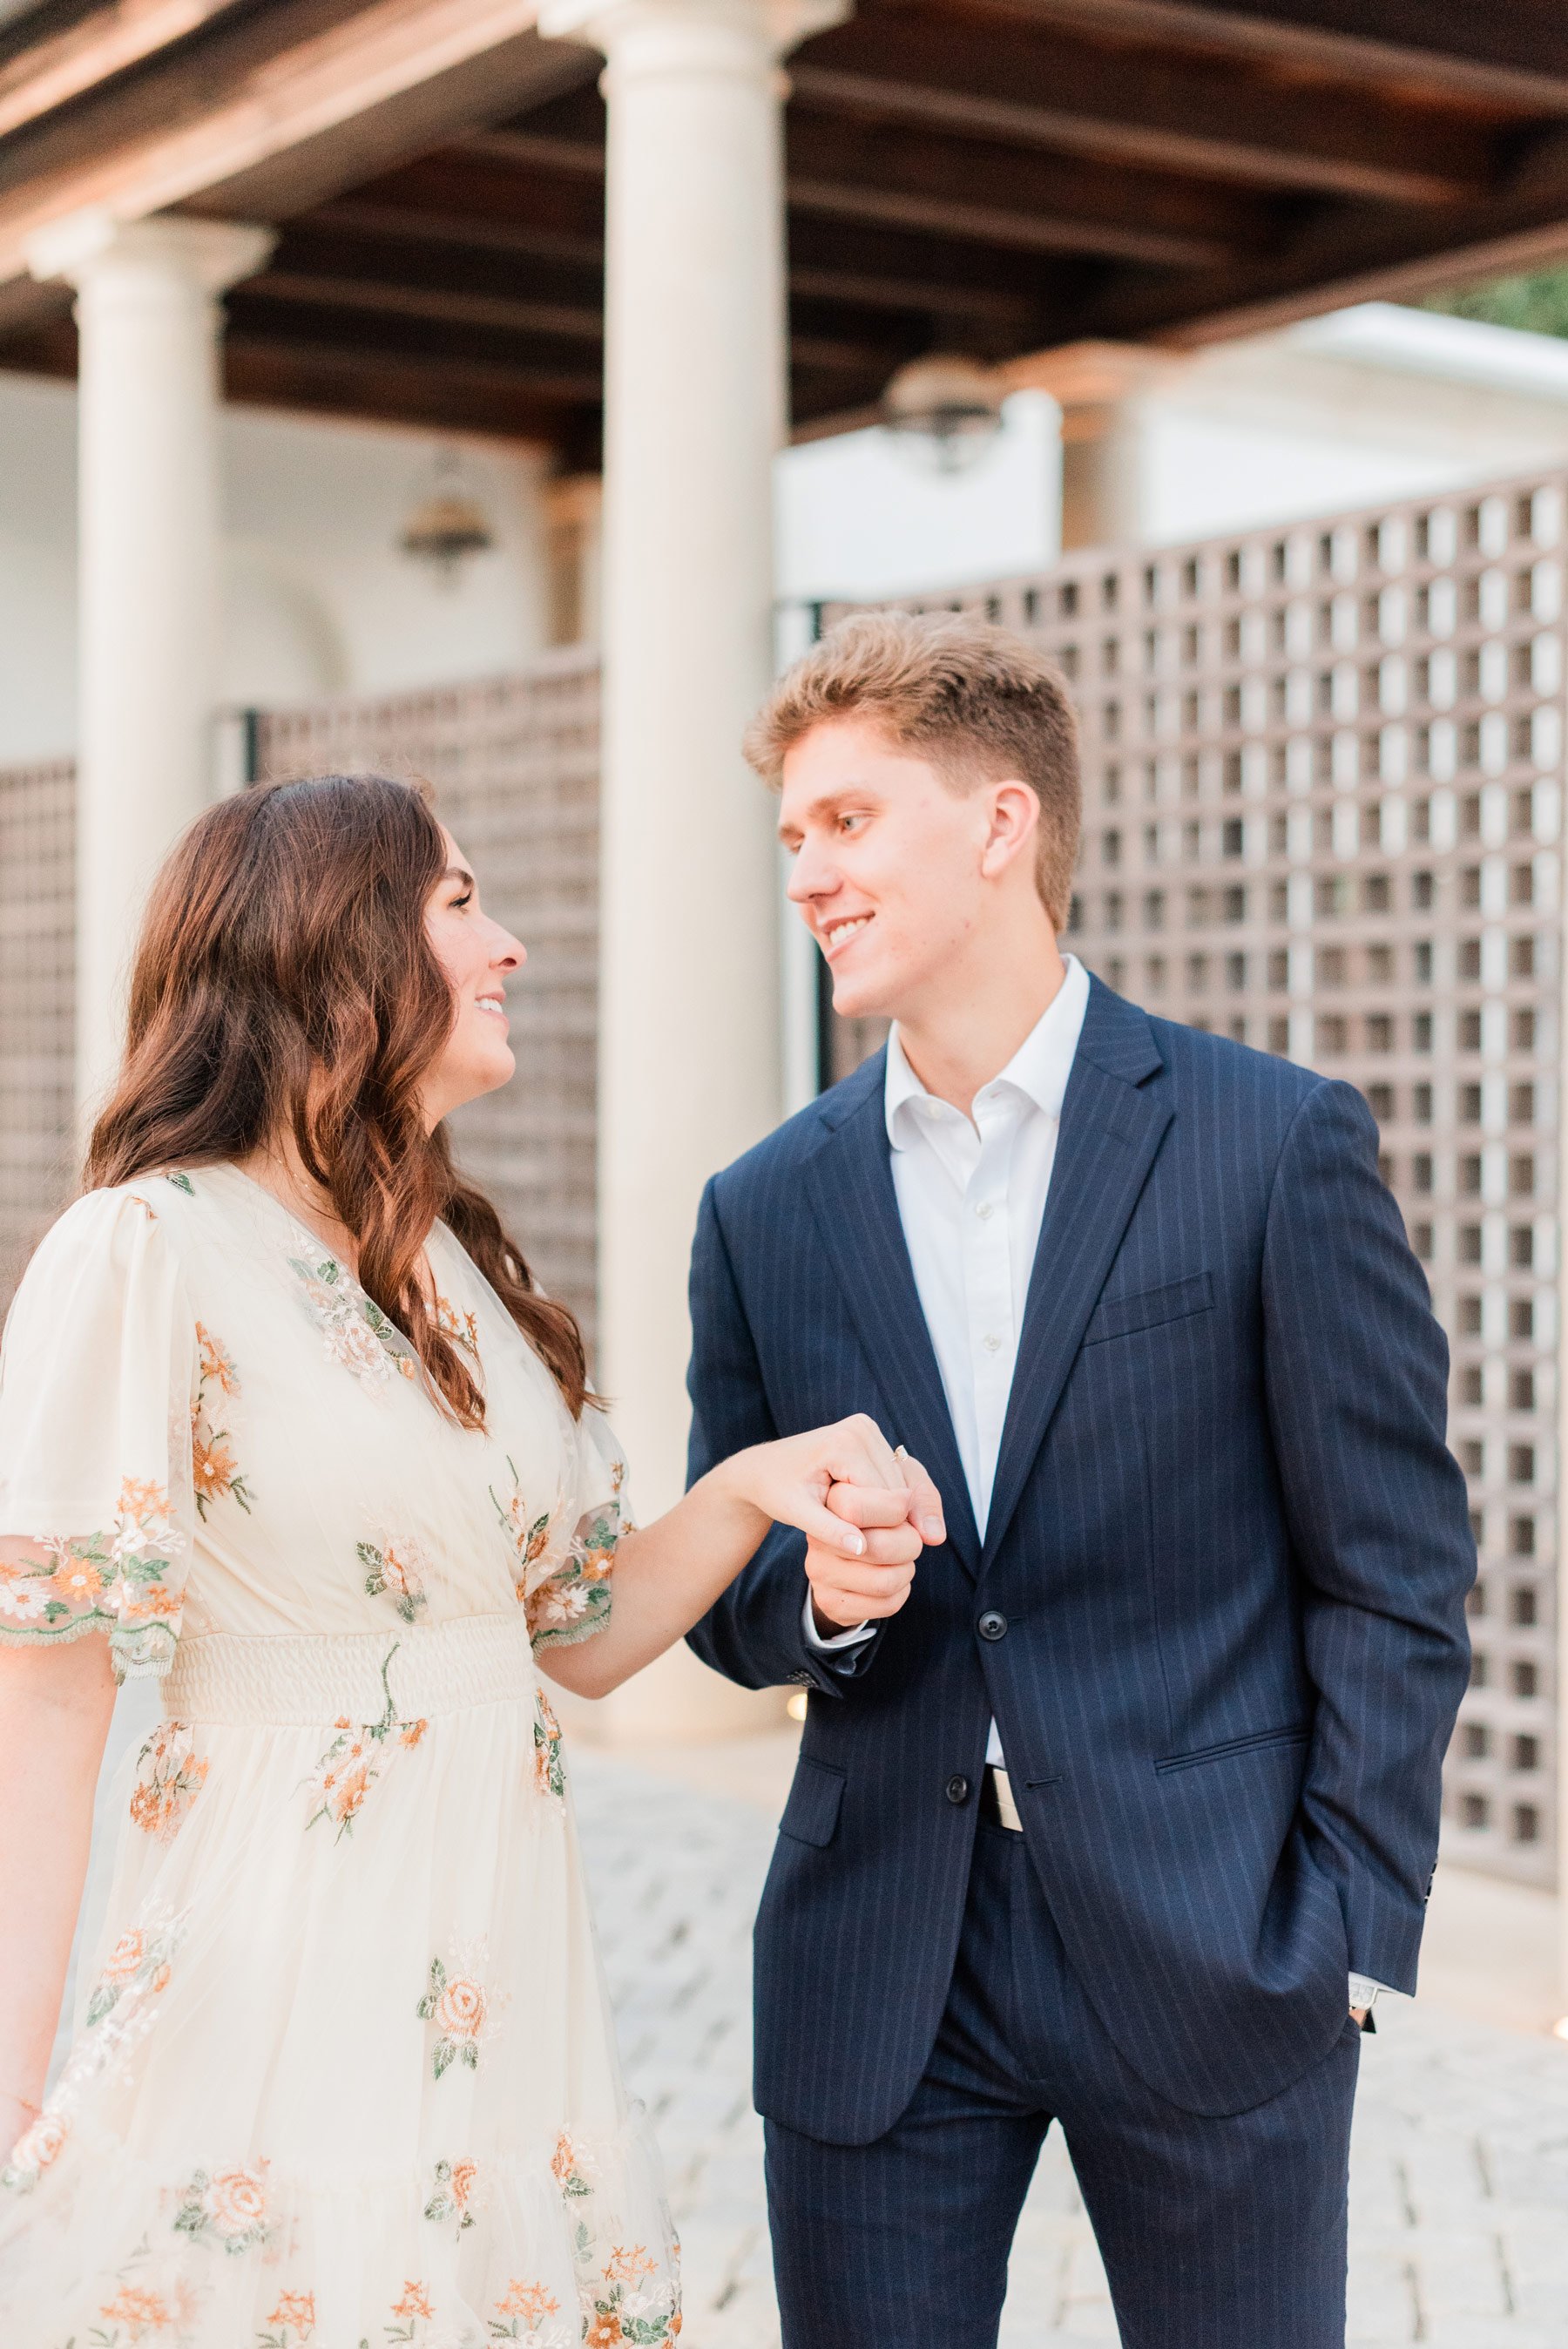    Engagement photos are a chance to capture your unique love story with a professional wedding photographer. #trilithstudios #georgiaweddingphotographer #fayettevillephotographer #fayettevilleengagementphotos #outdoorengagements #formalengagementpho